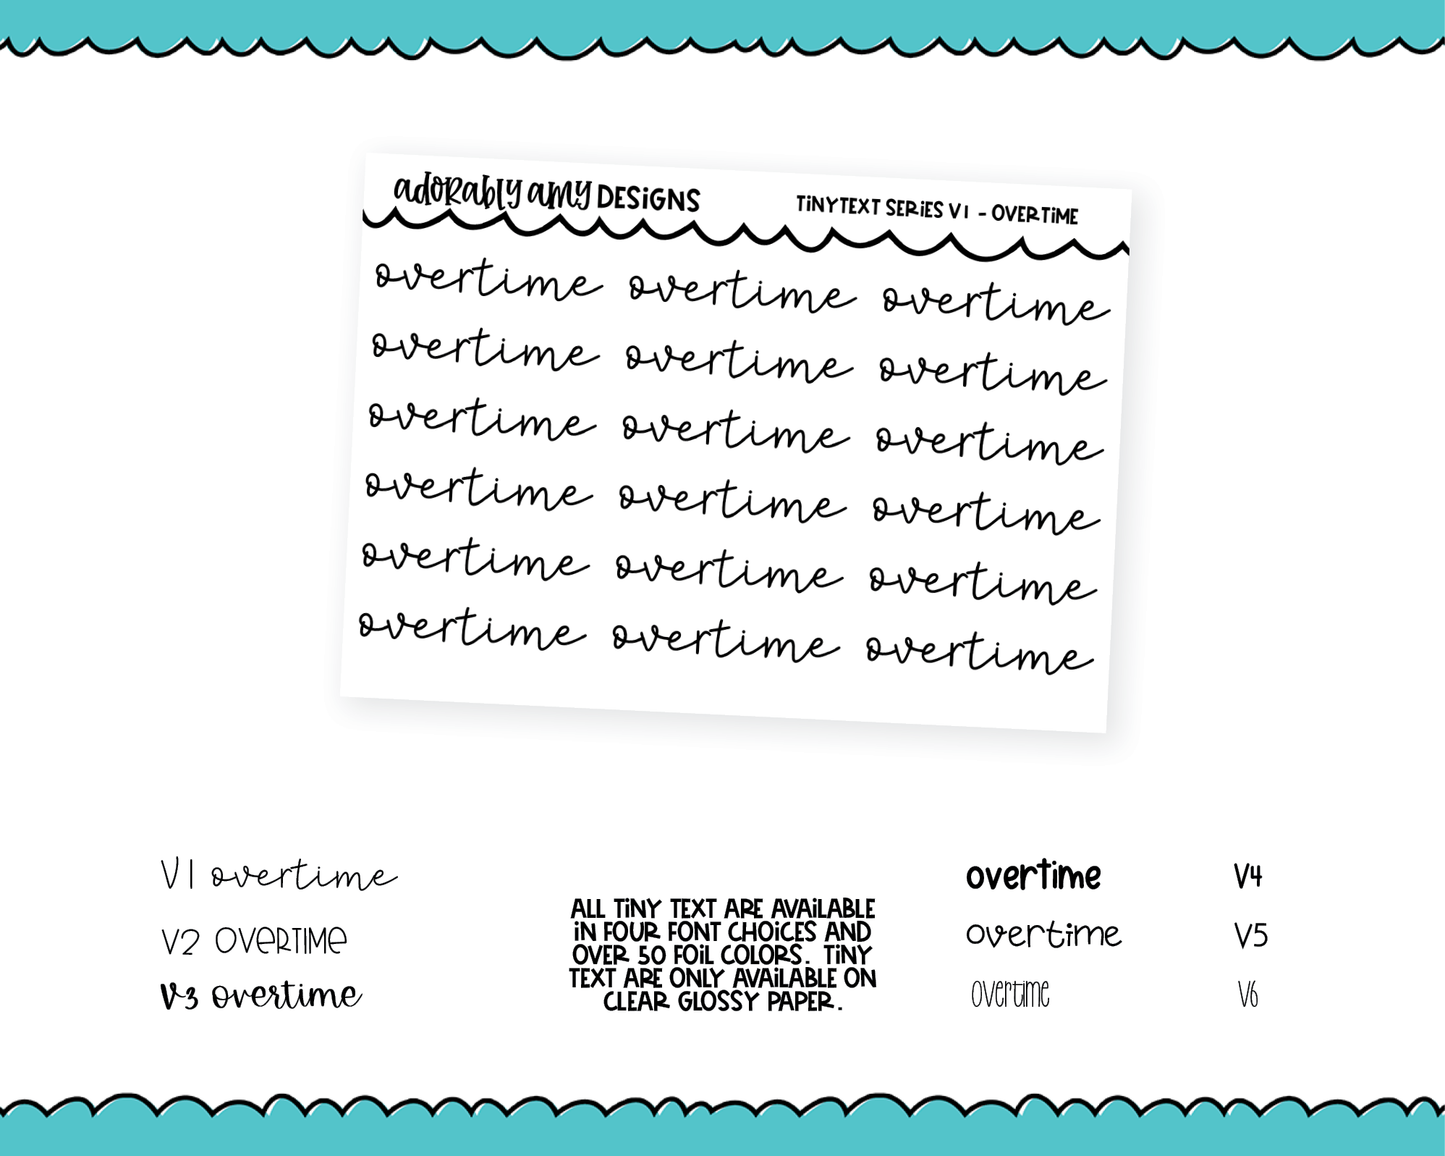 Foiled Tiny Text Series - Overtime Checklist Size Planner Stickers for any Planner or Insert